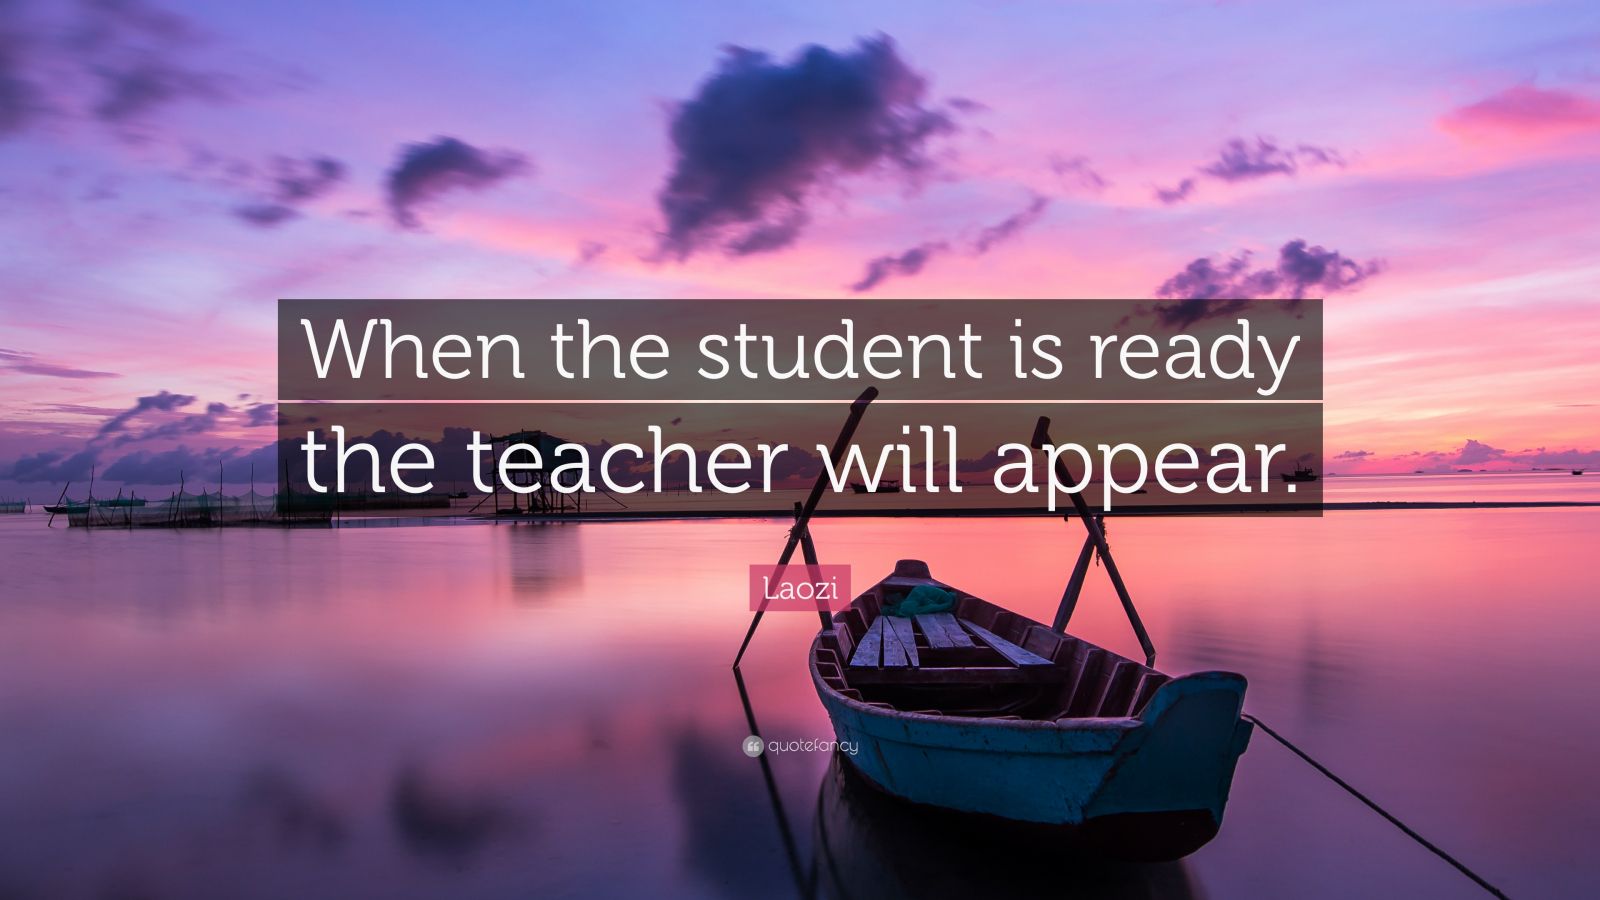 Laozi Quote: “When the student is ready the teacher will appear.” (12